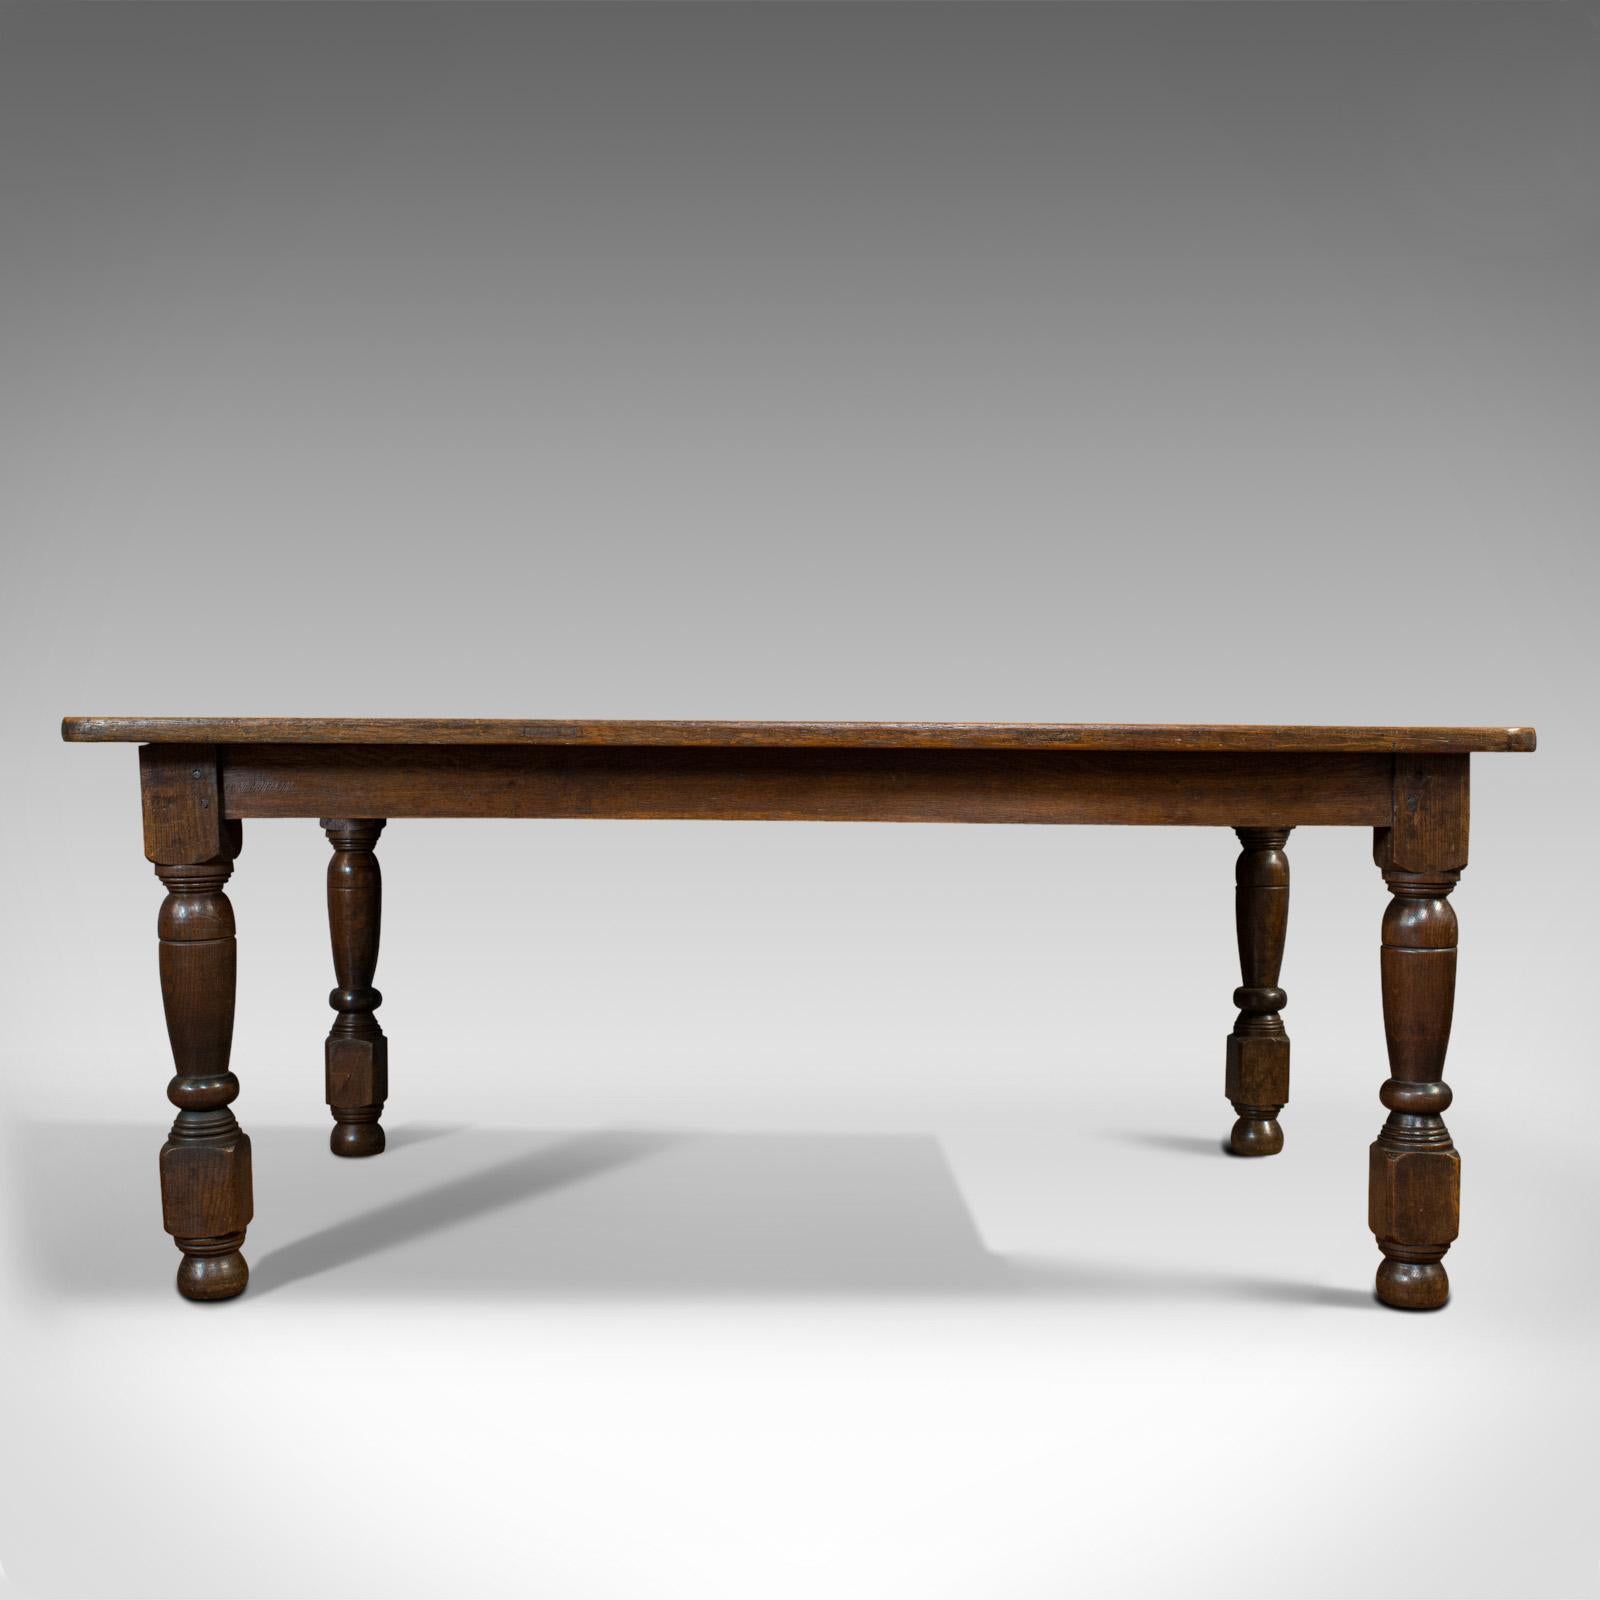 British Antique Dining Table, English, Oak, 6 Seat, Country House, Victorian, 1900